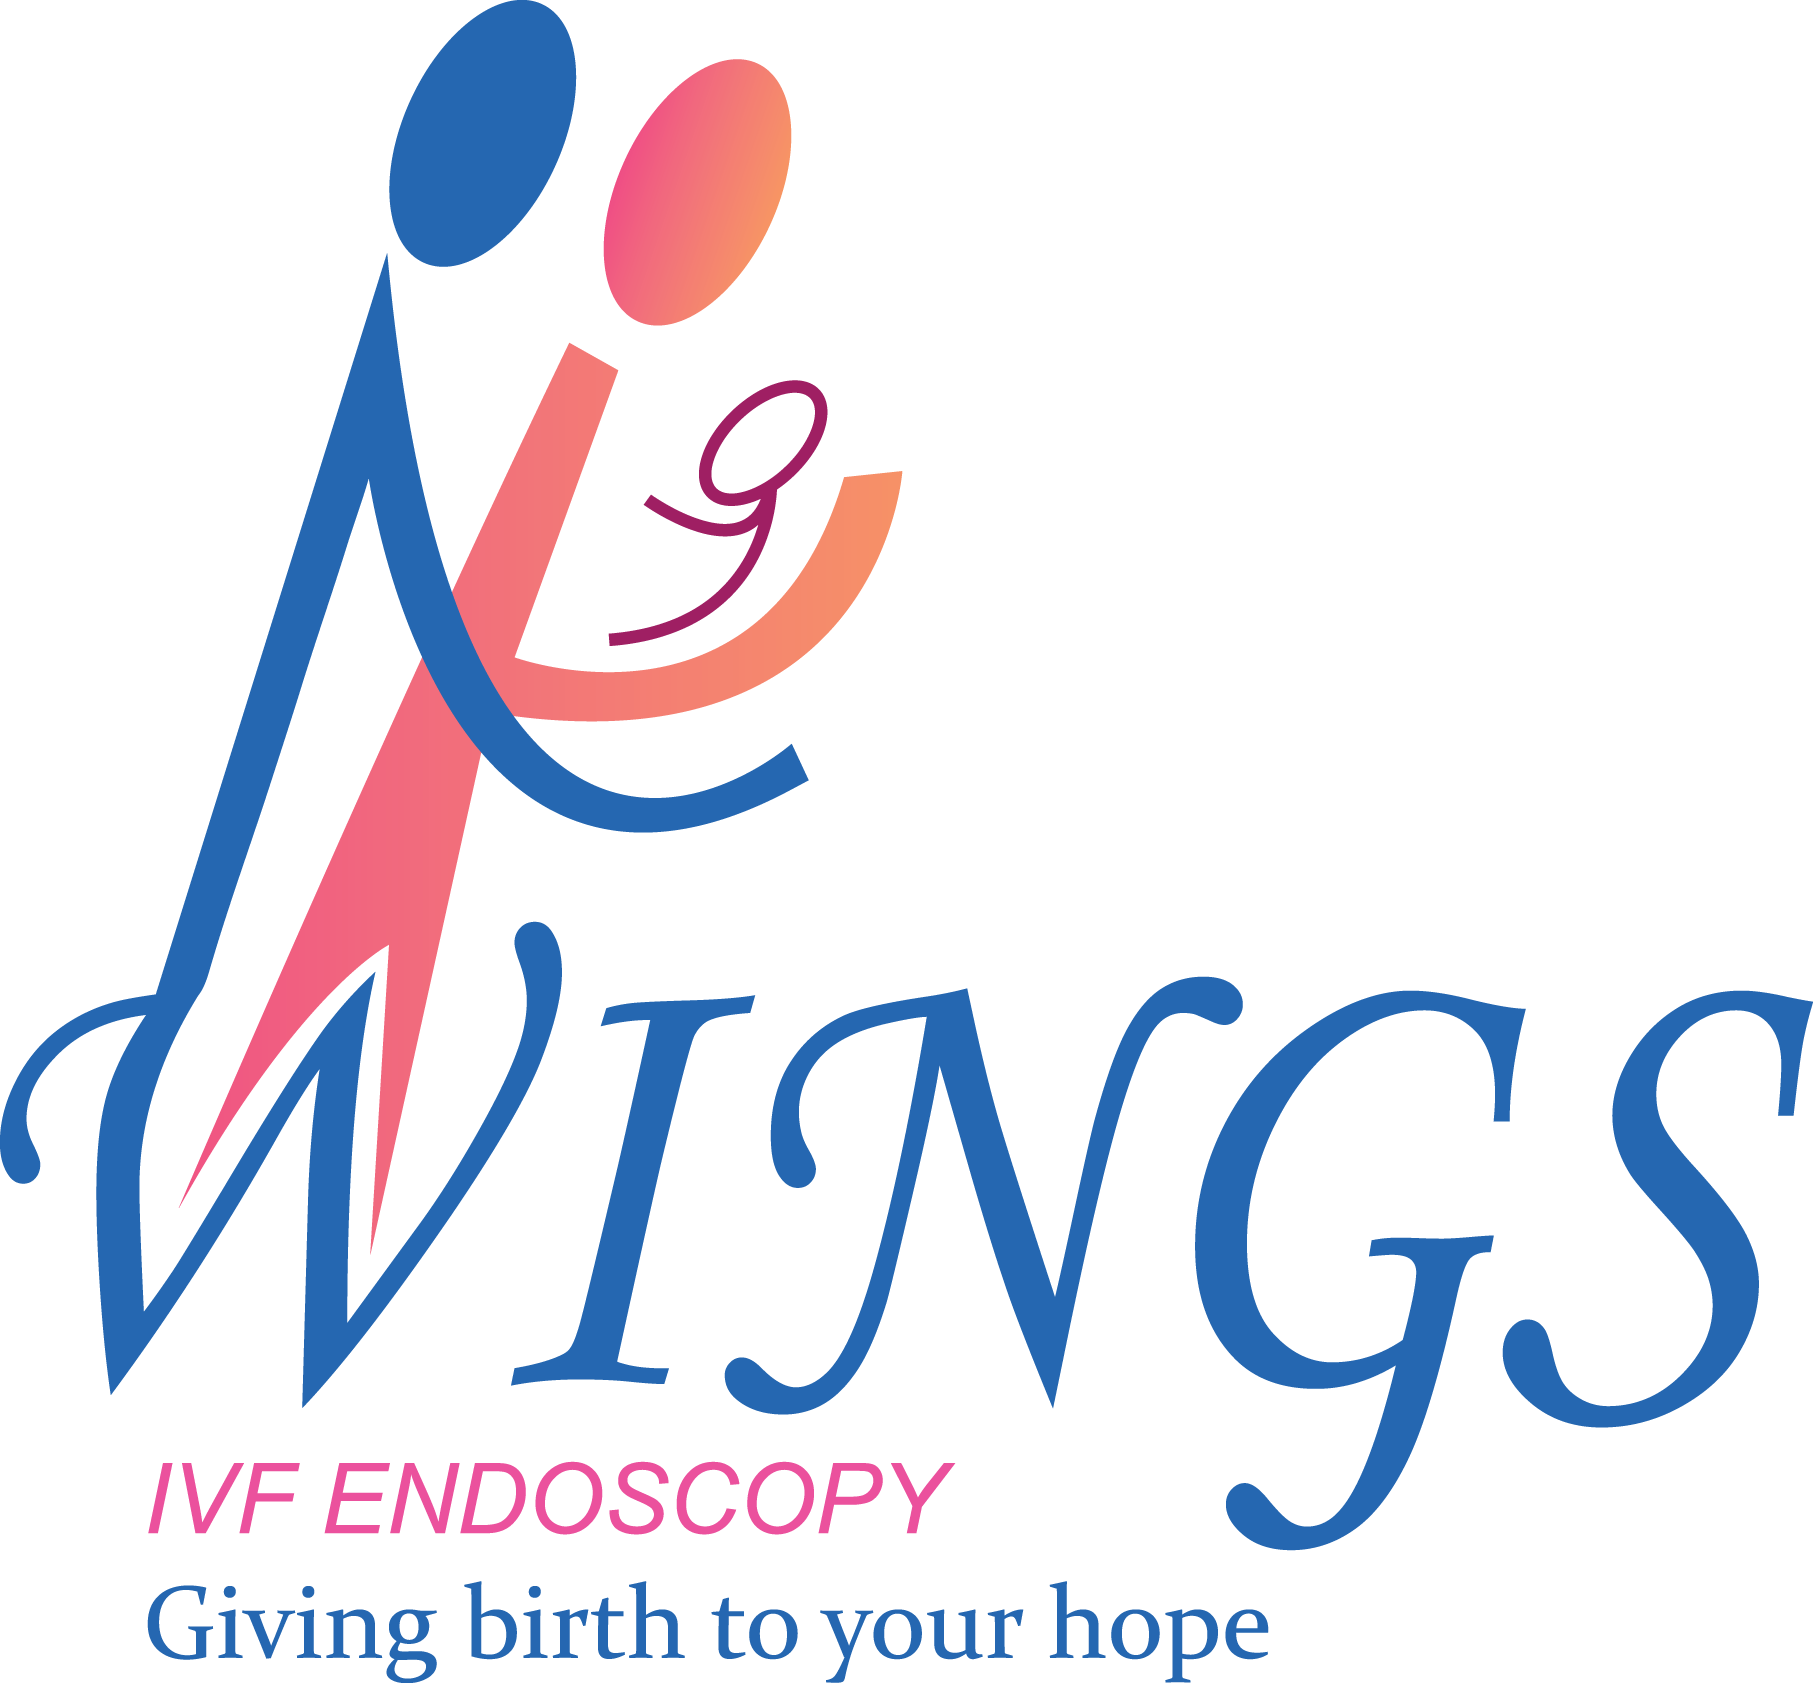 Wings Hospitals|Dentists|Medical Services